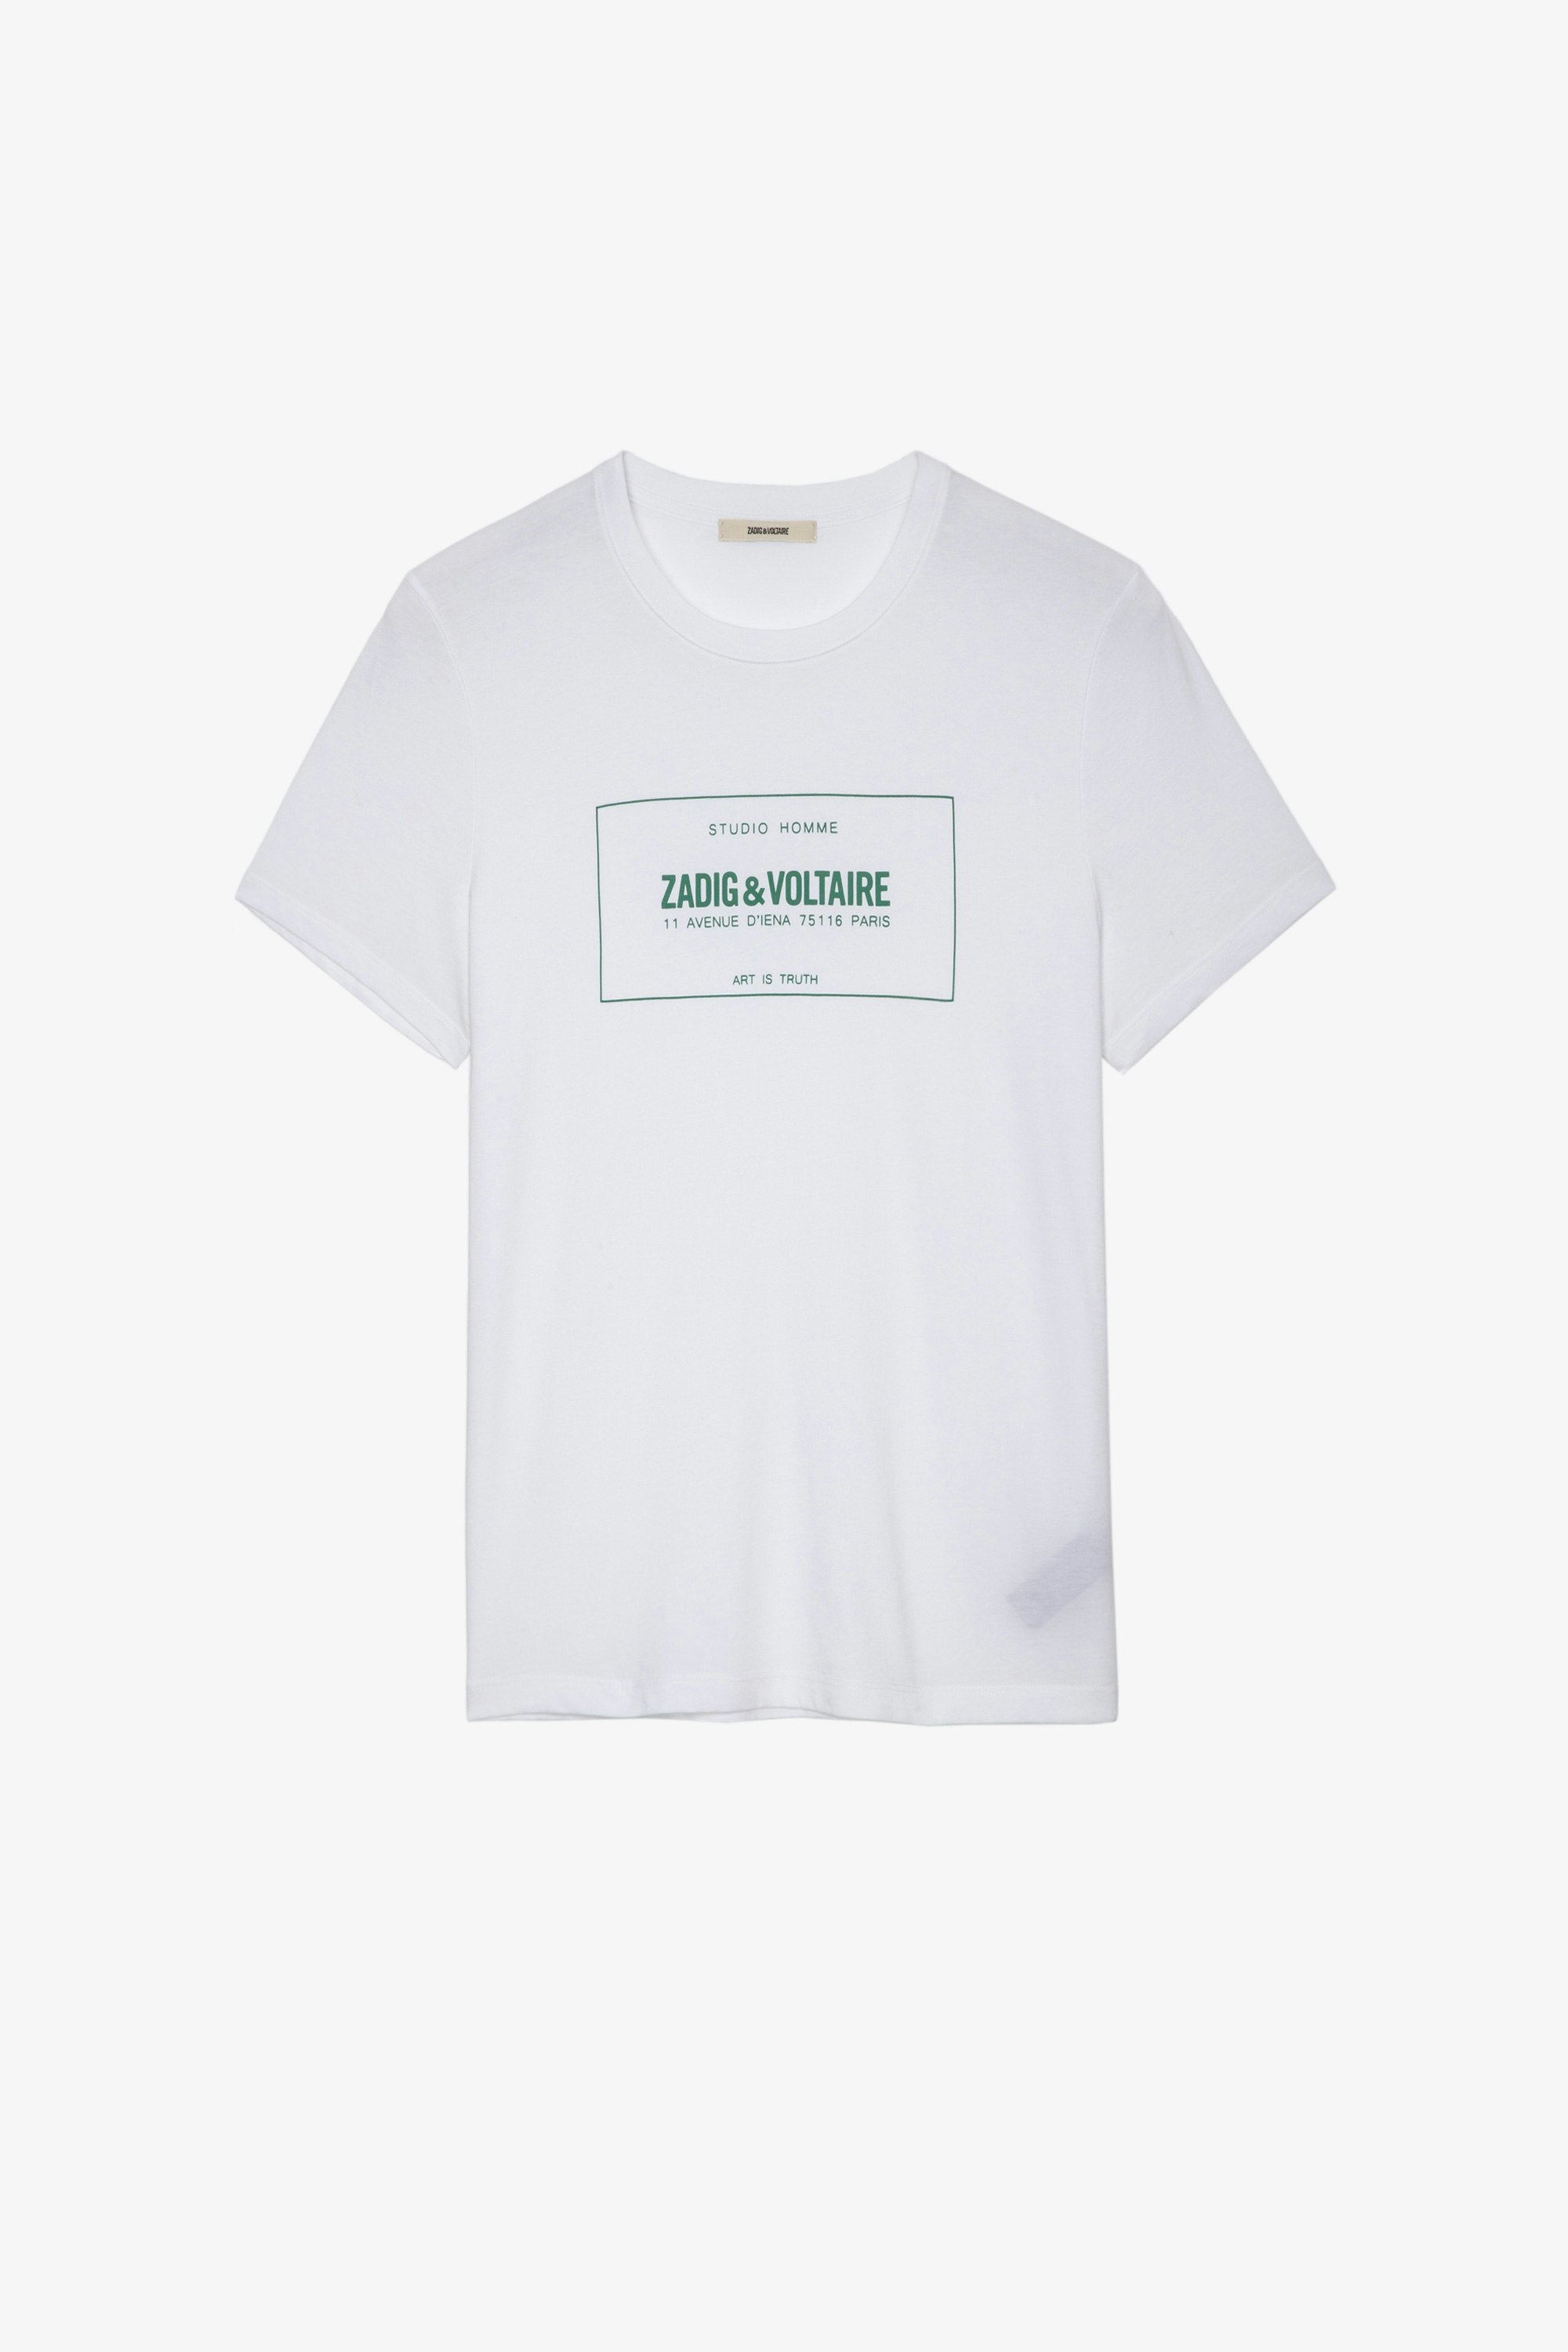 Ted Insignia T-Shirt Men’s white cotton T-shirt with the brand insignia